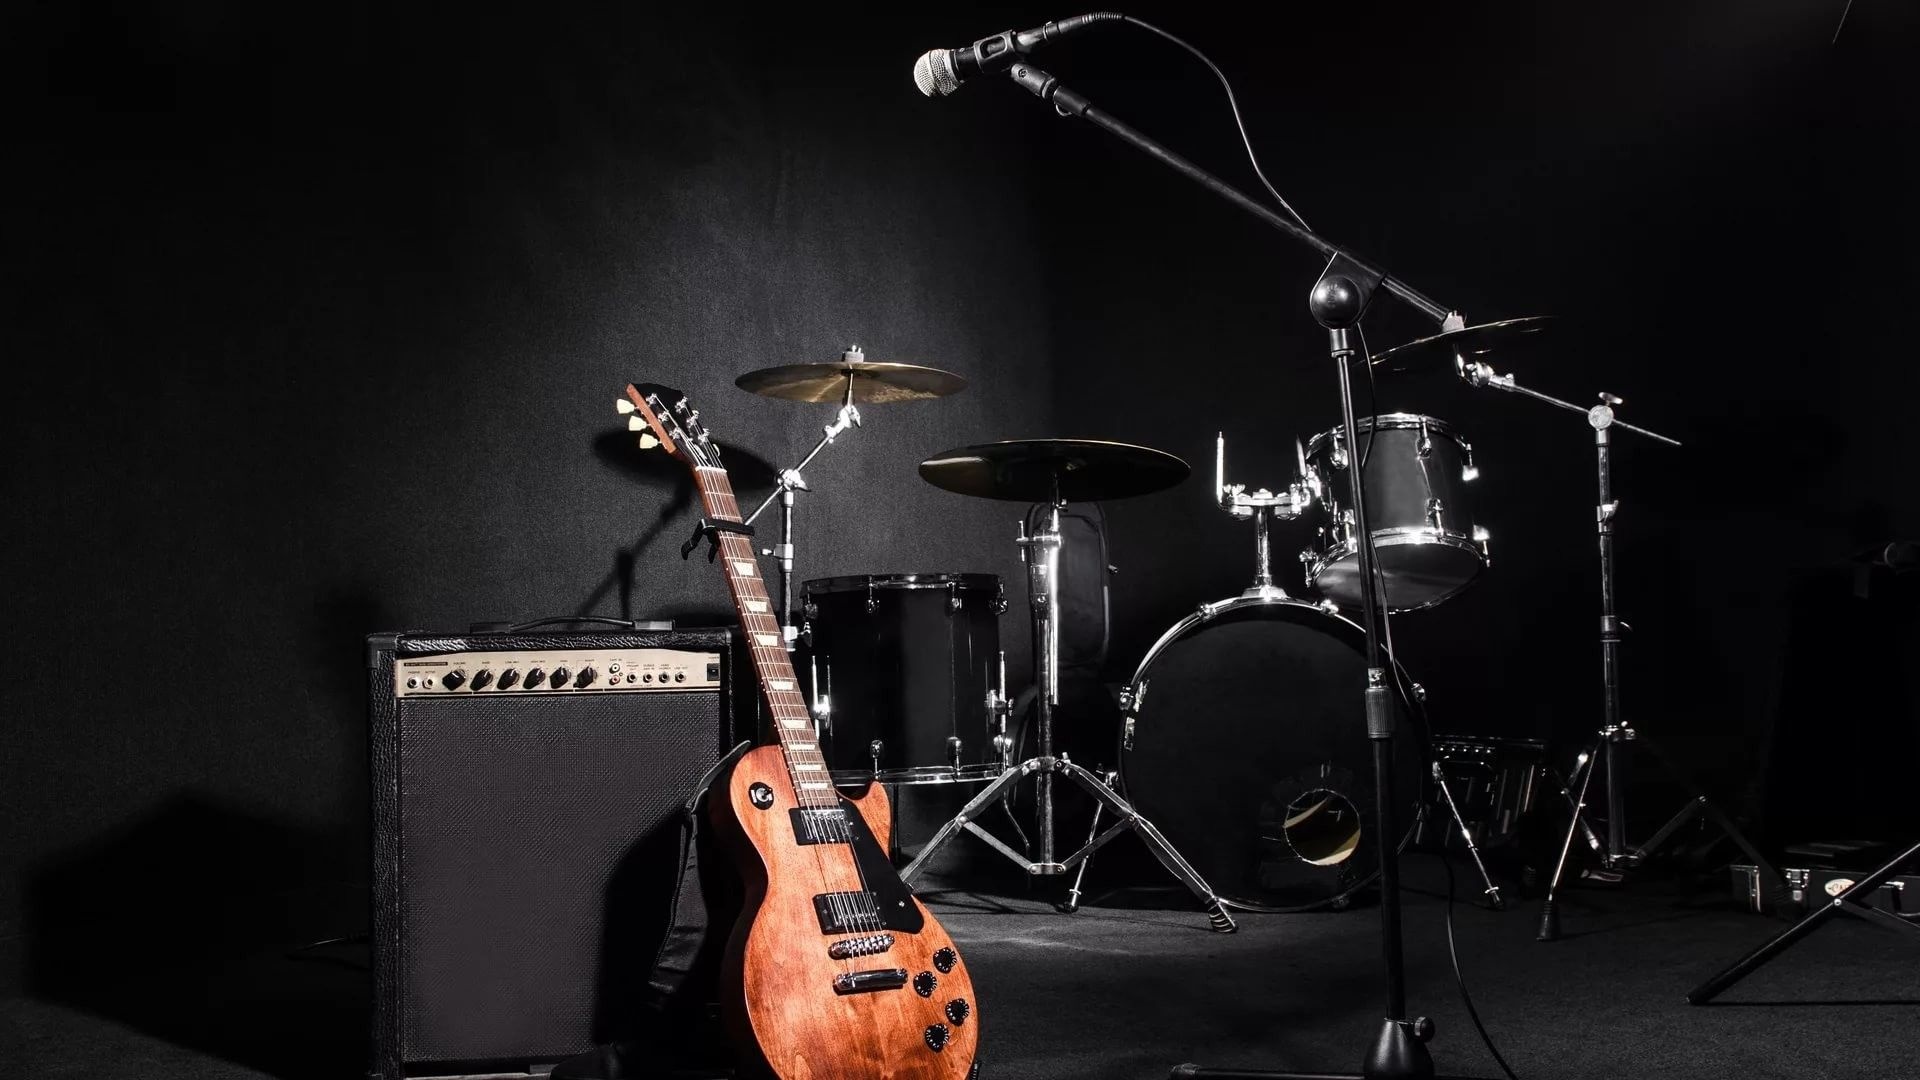 Musical Instruments: Rock band Instrument, The lead guitar plugged into an amp, A standard, four-piece drum set. 1920x1080 Full HD Background.